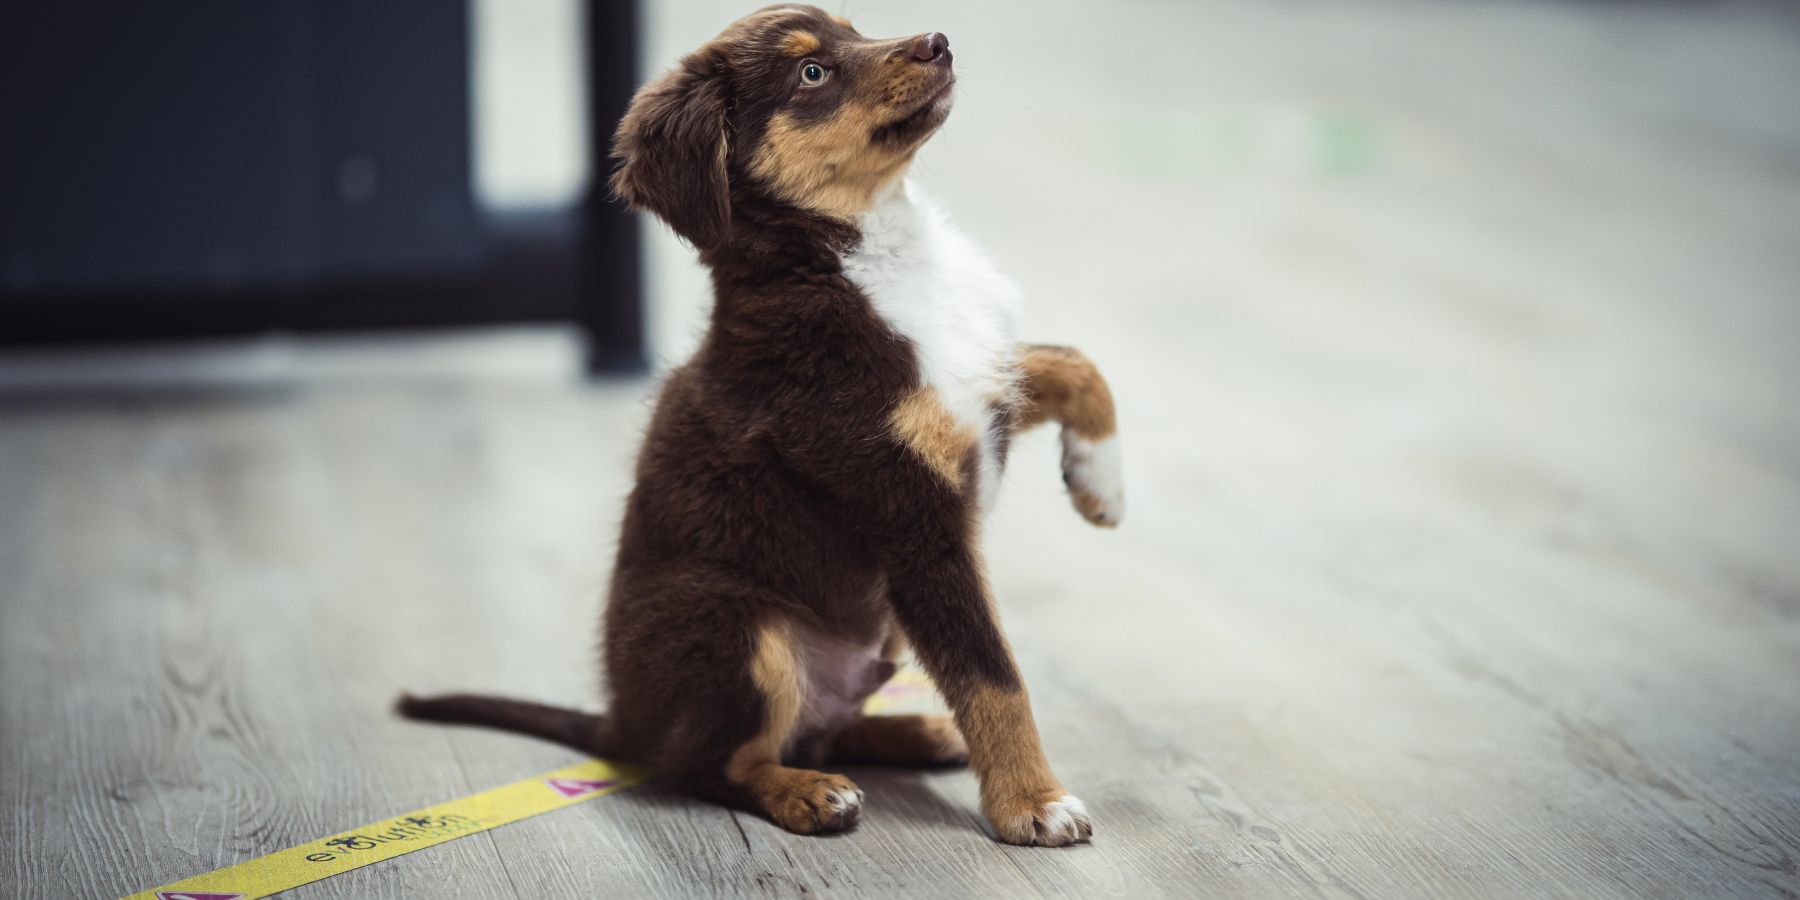 Healthy Habits Start Early: Nutrition, Sleep, and Health Care for Your 8-Week-Old Puppy